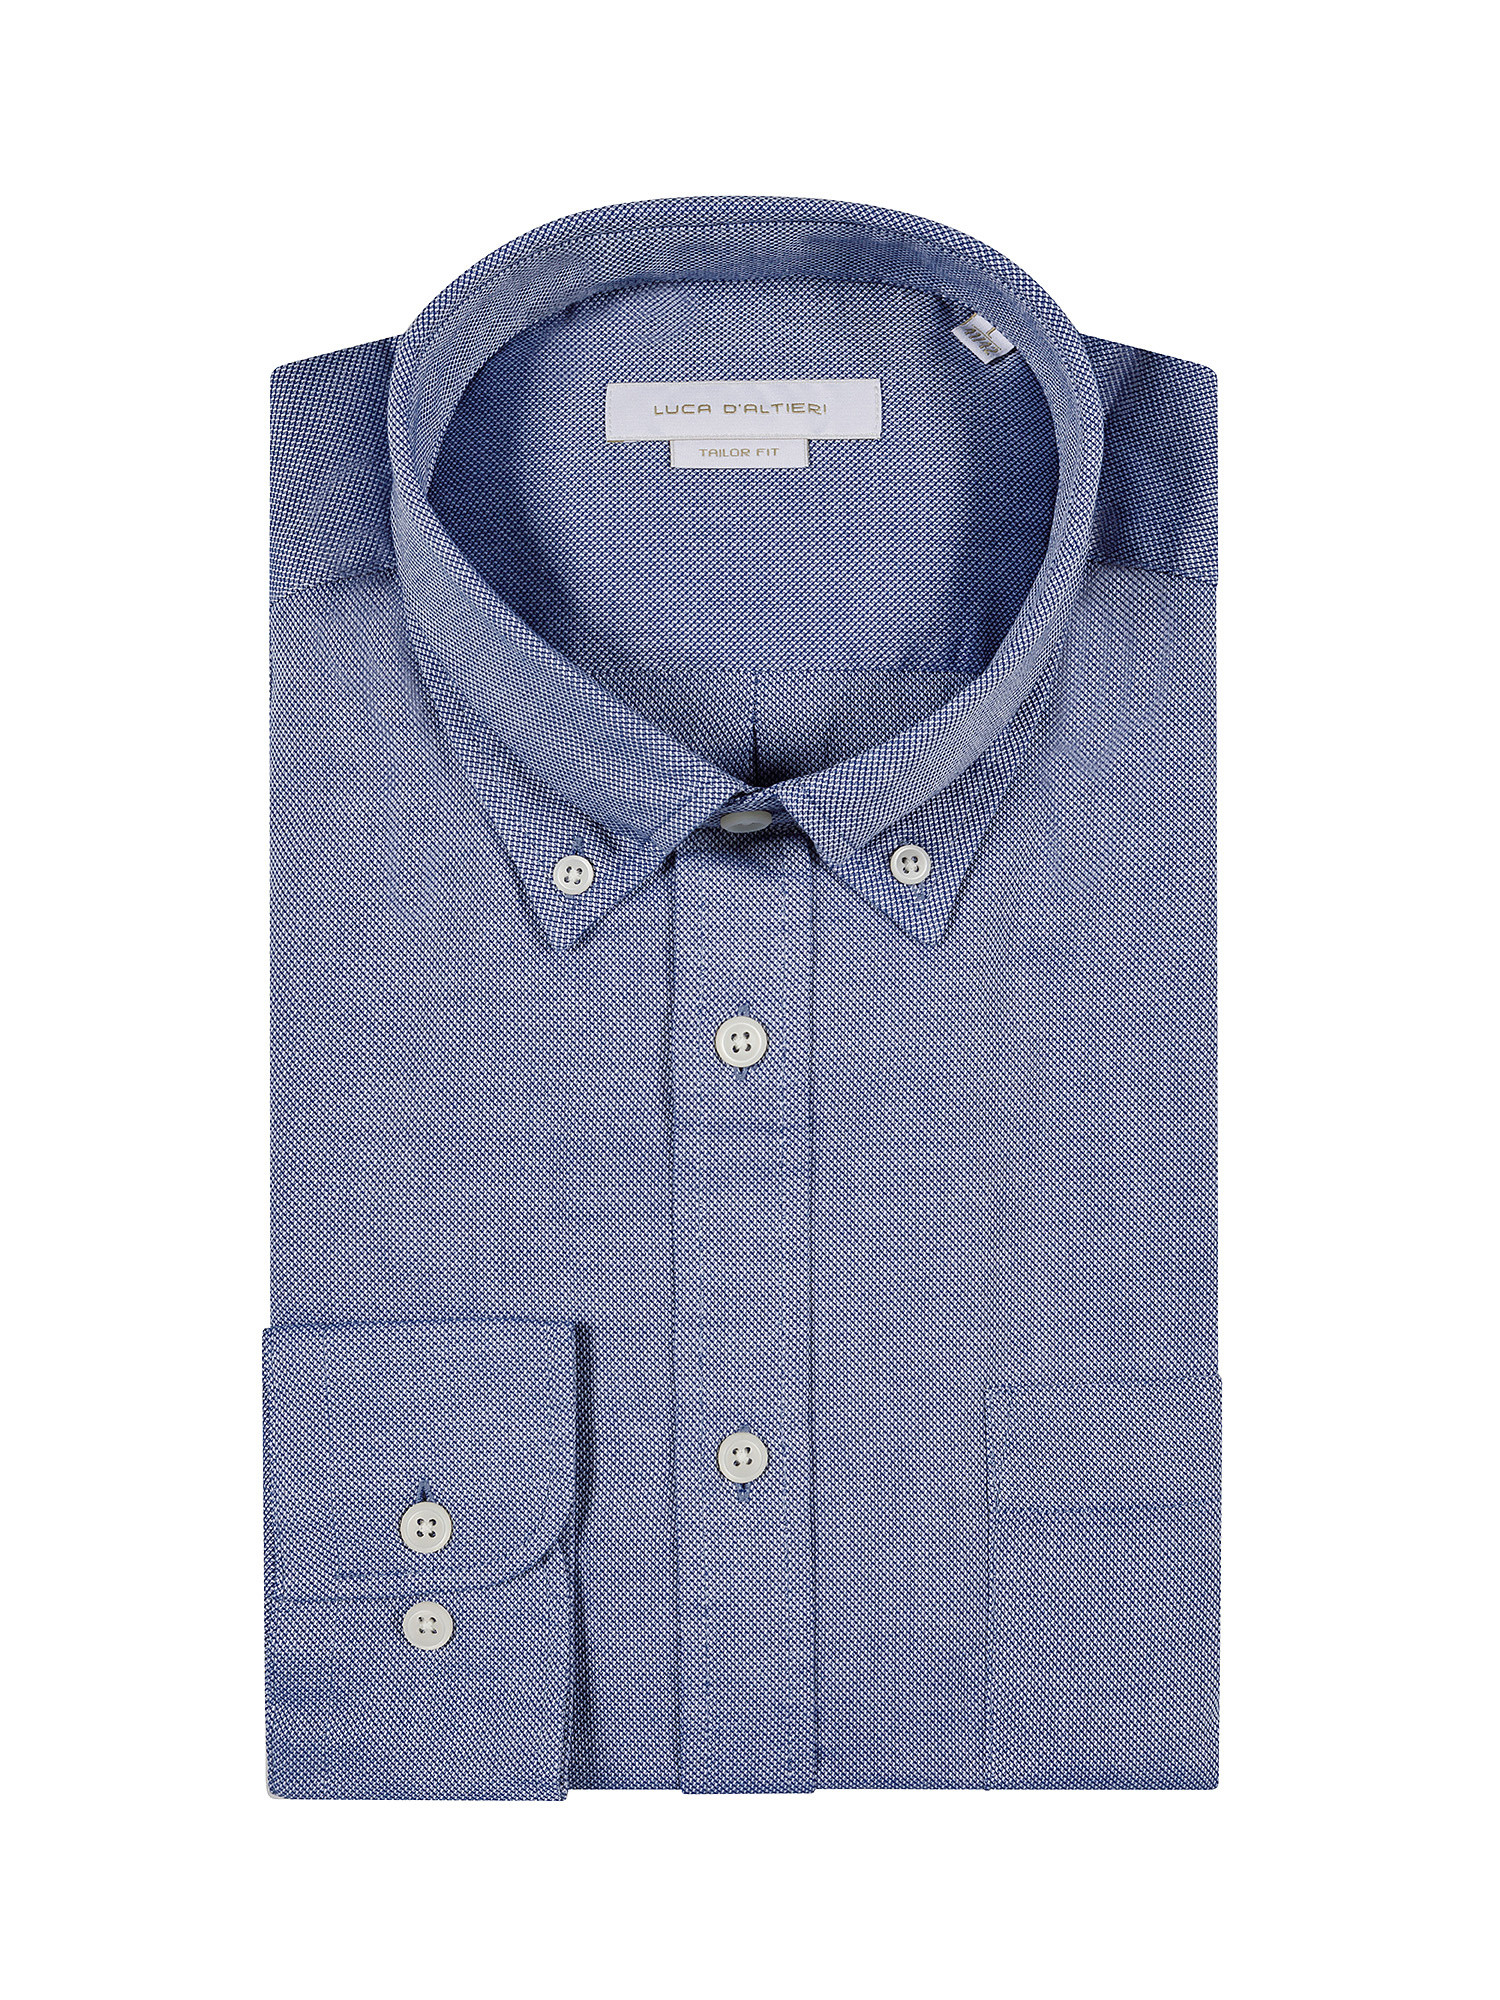 Oxford fabric shirt, Blue, large image number 2